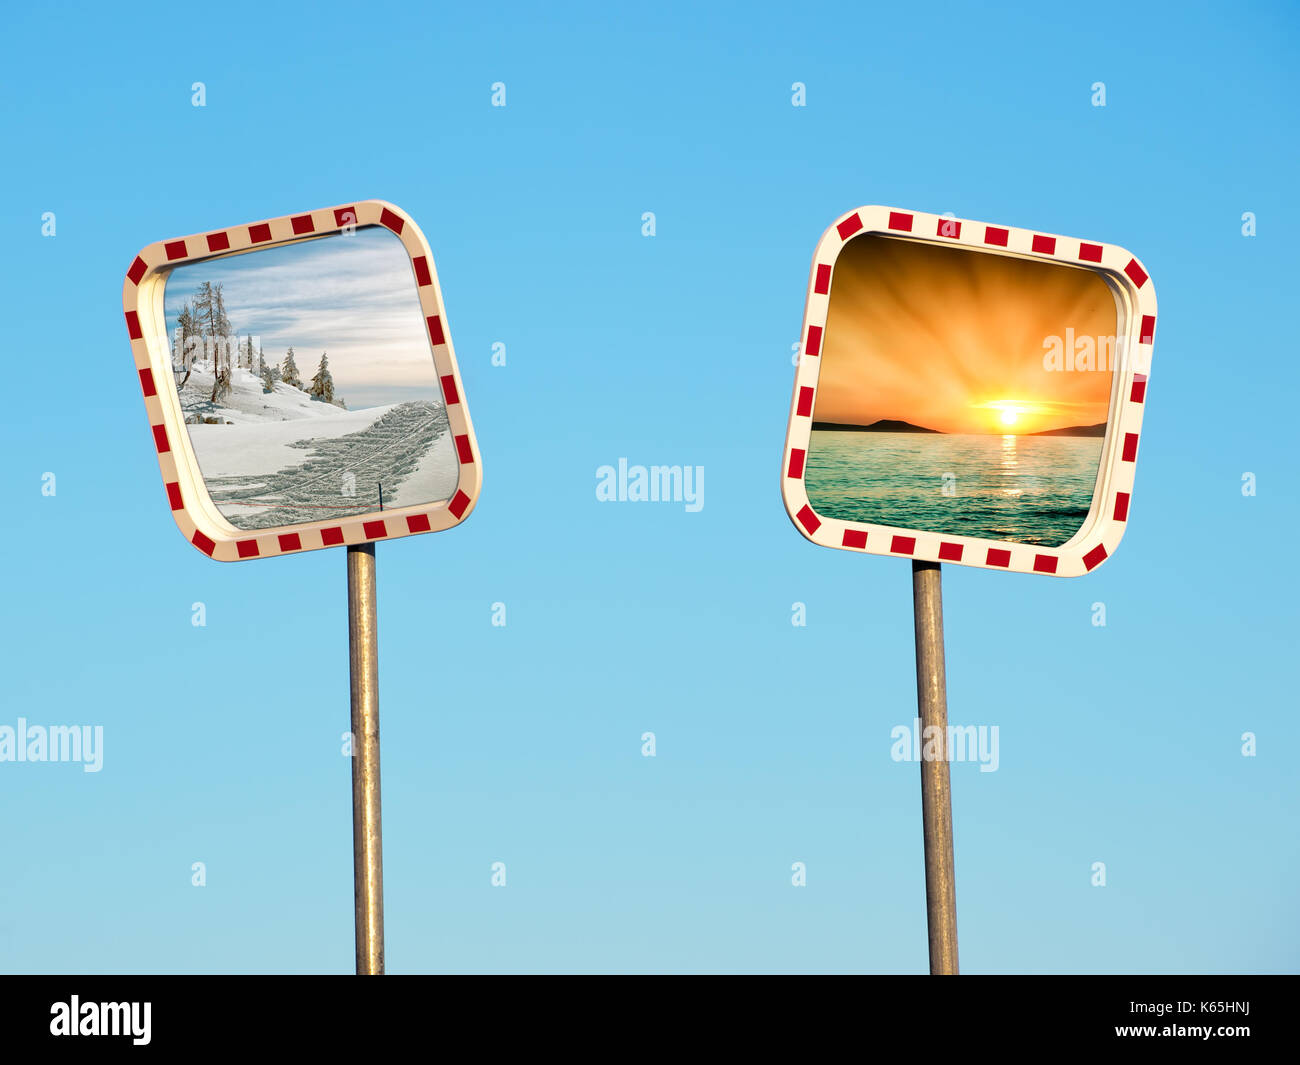 Conceptual image as a choice between winter and summer presented on road mirrors. Stock Photo